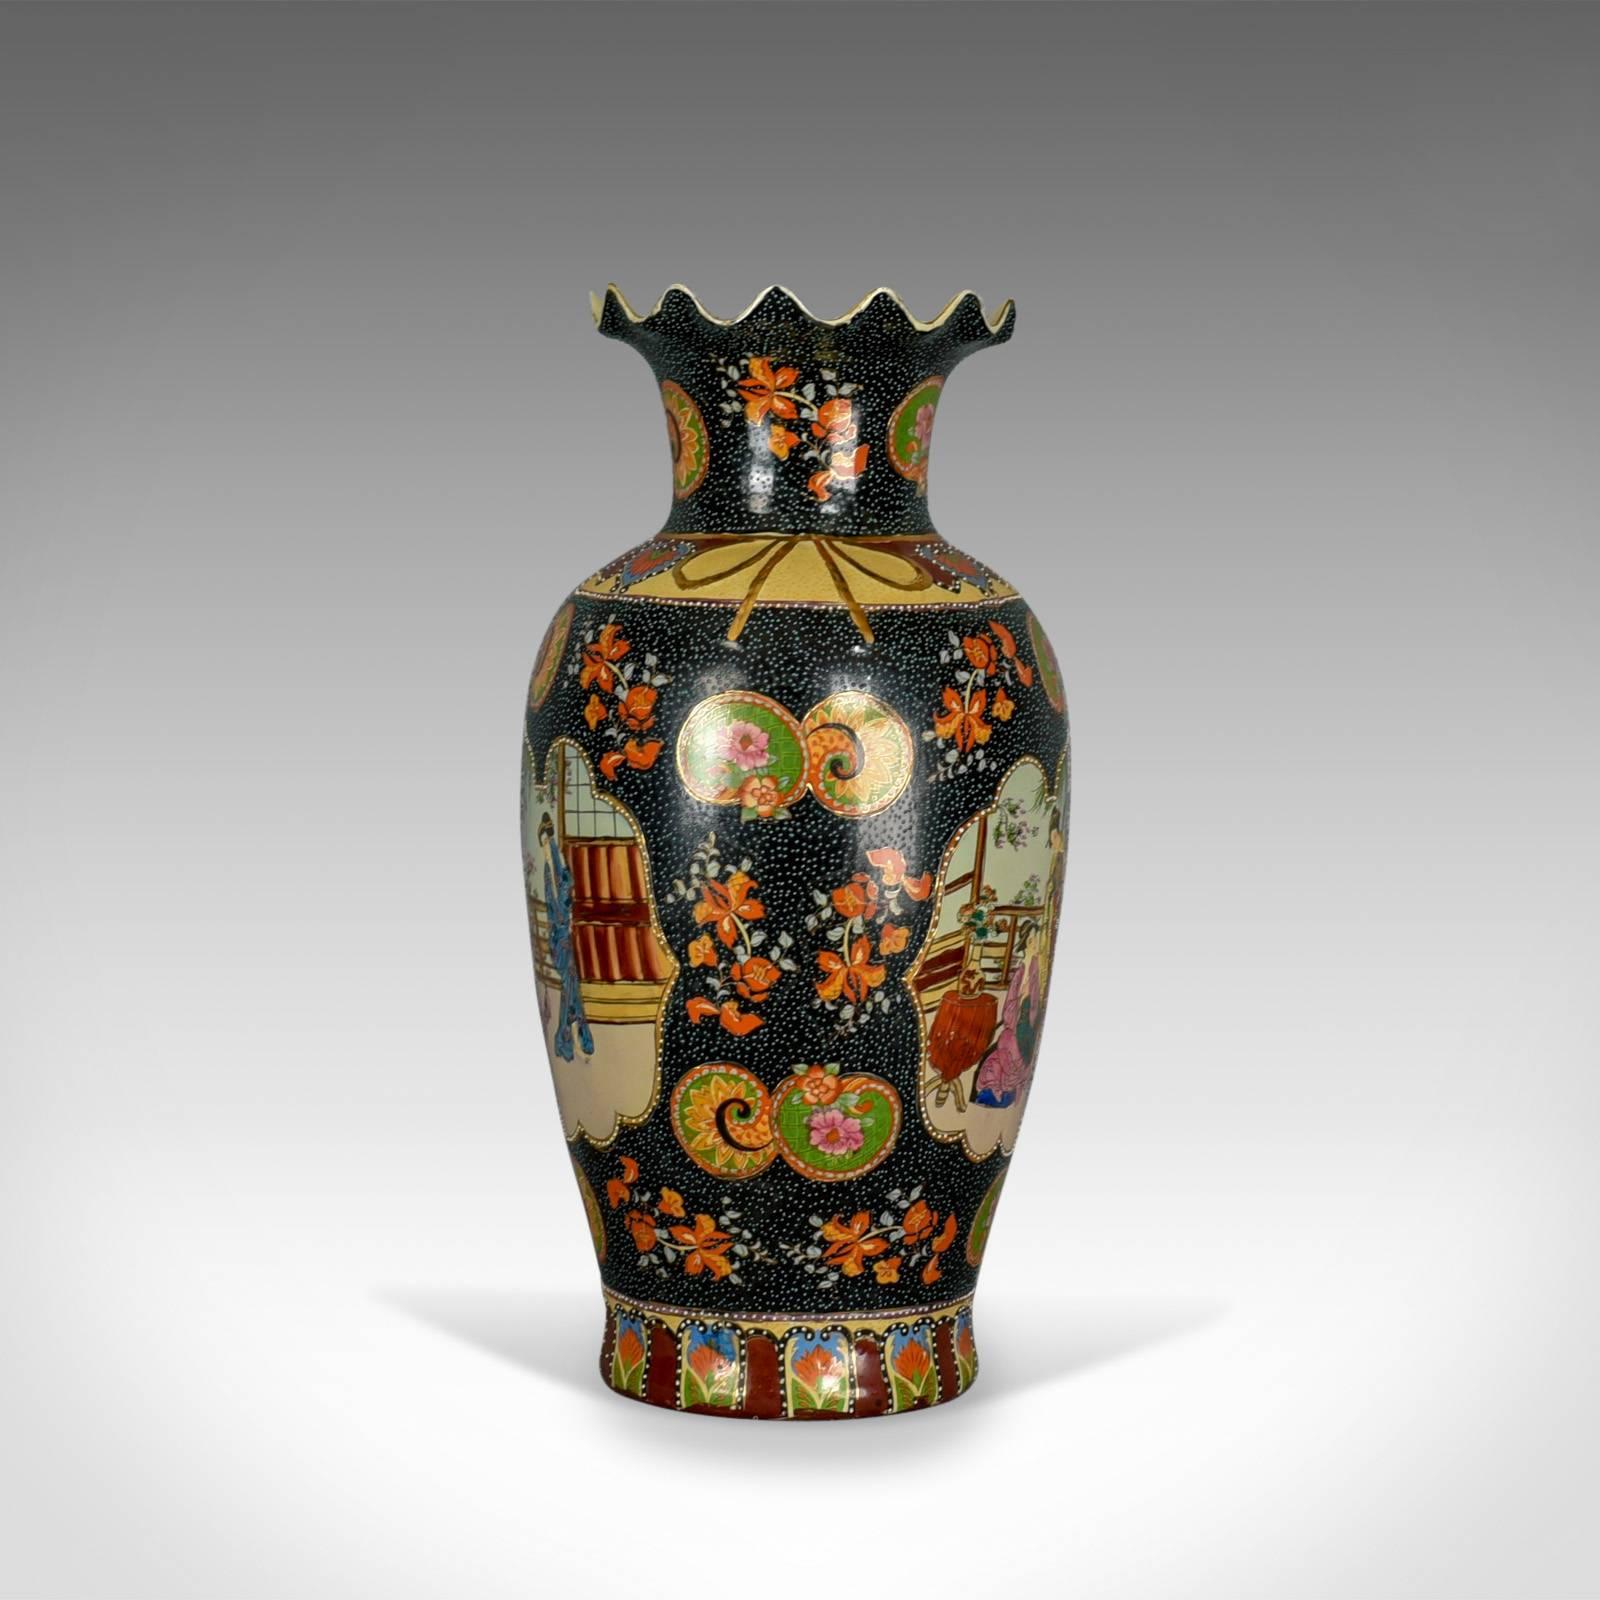 This is a large vintage Japanese baluster vase, a highly decorated oriental ceramic vase with a crimped neck, dating to the mid-late 20th century.

Of classic form and in good proportion
Of quality craftsmanship, free from damage
Unmarked base